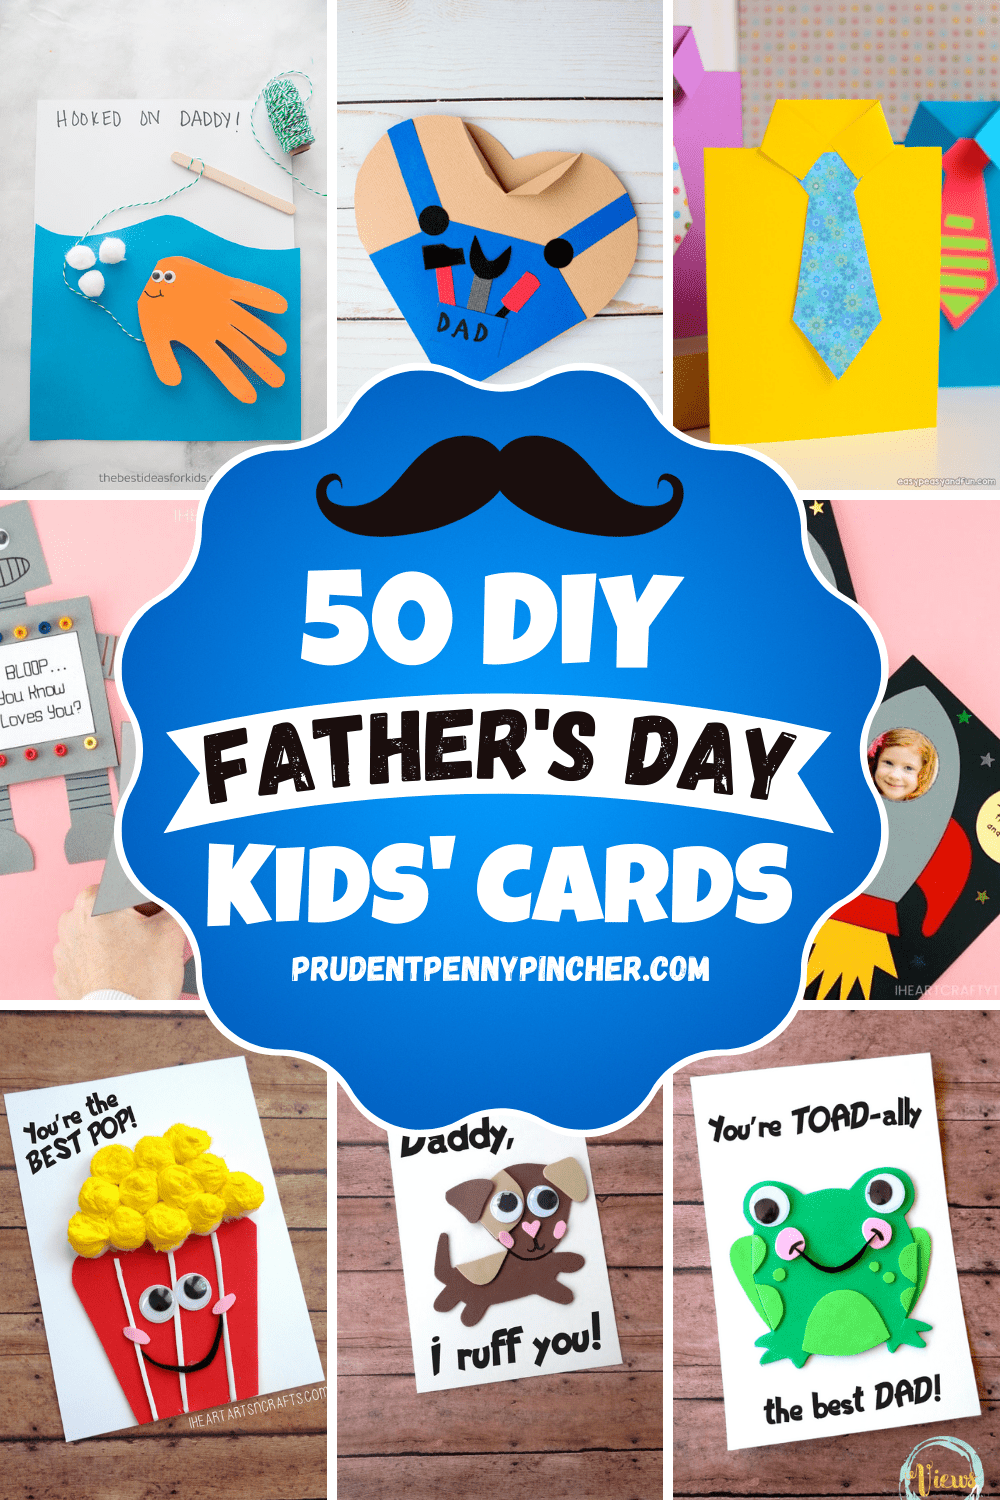 50 Homemade Father's Day Cards for Kids to Make - Prudent Penny Pincher